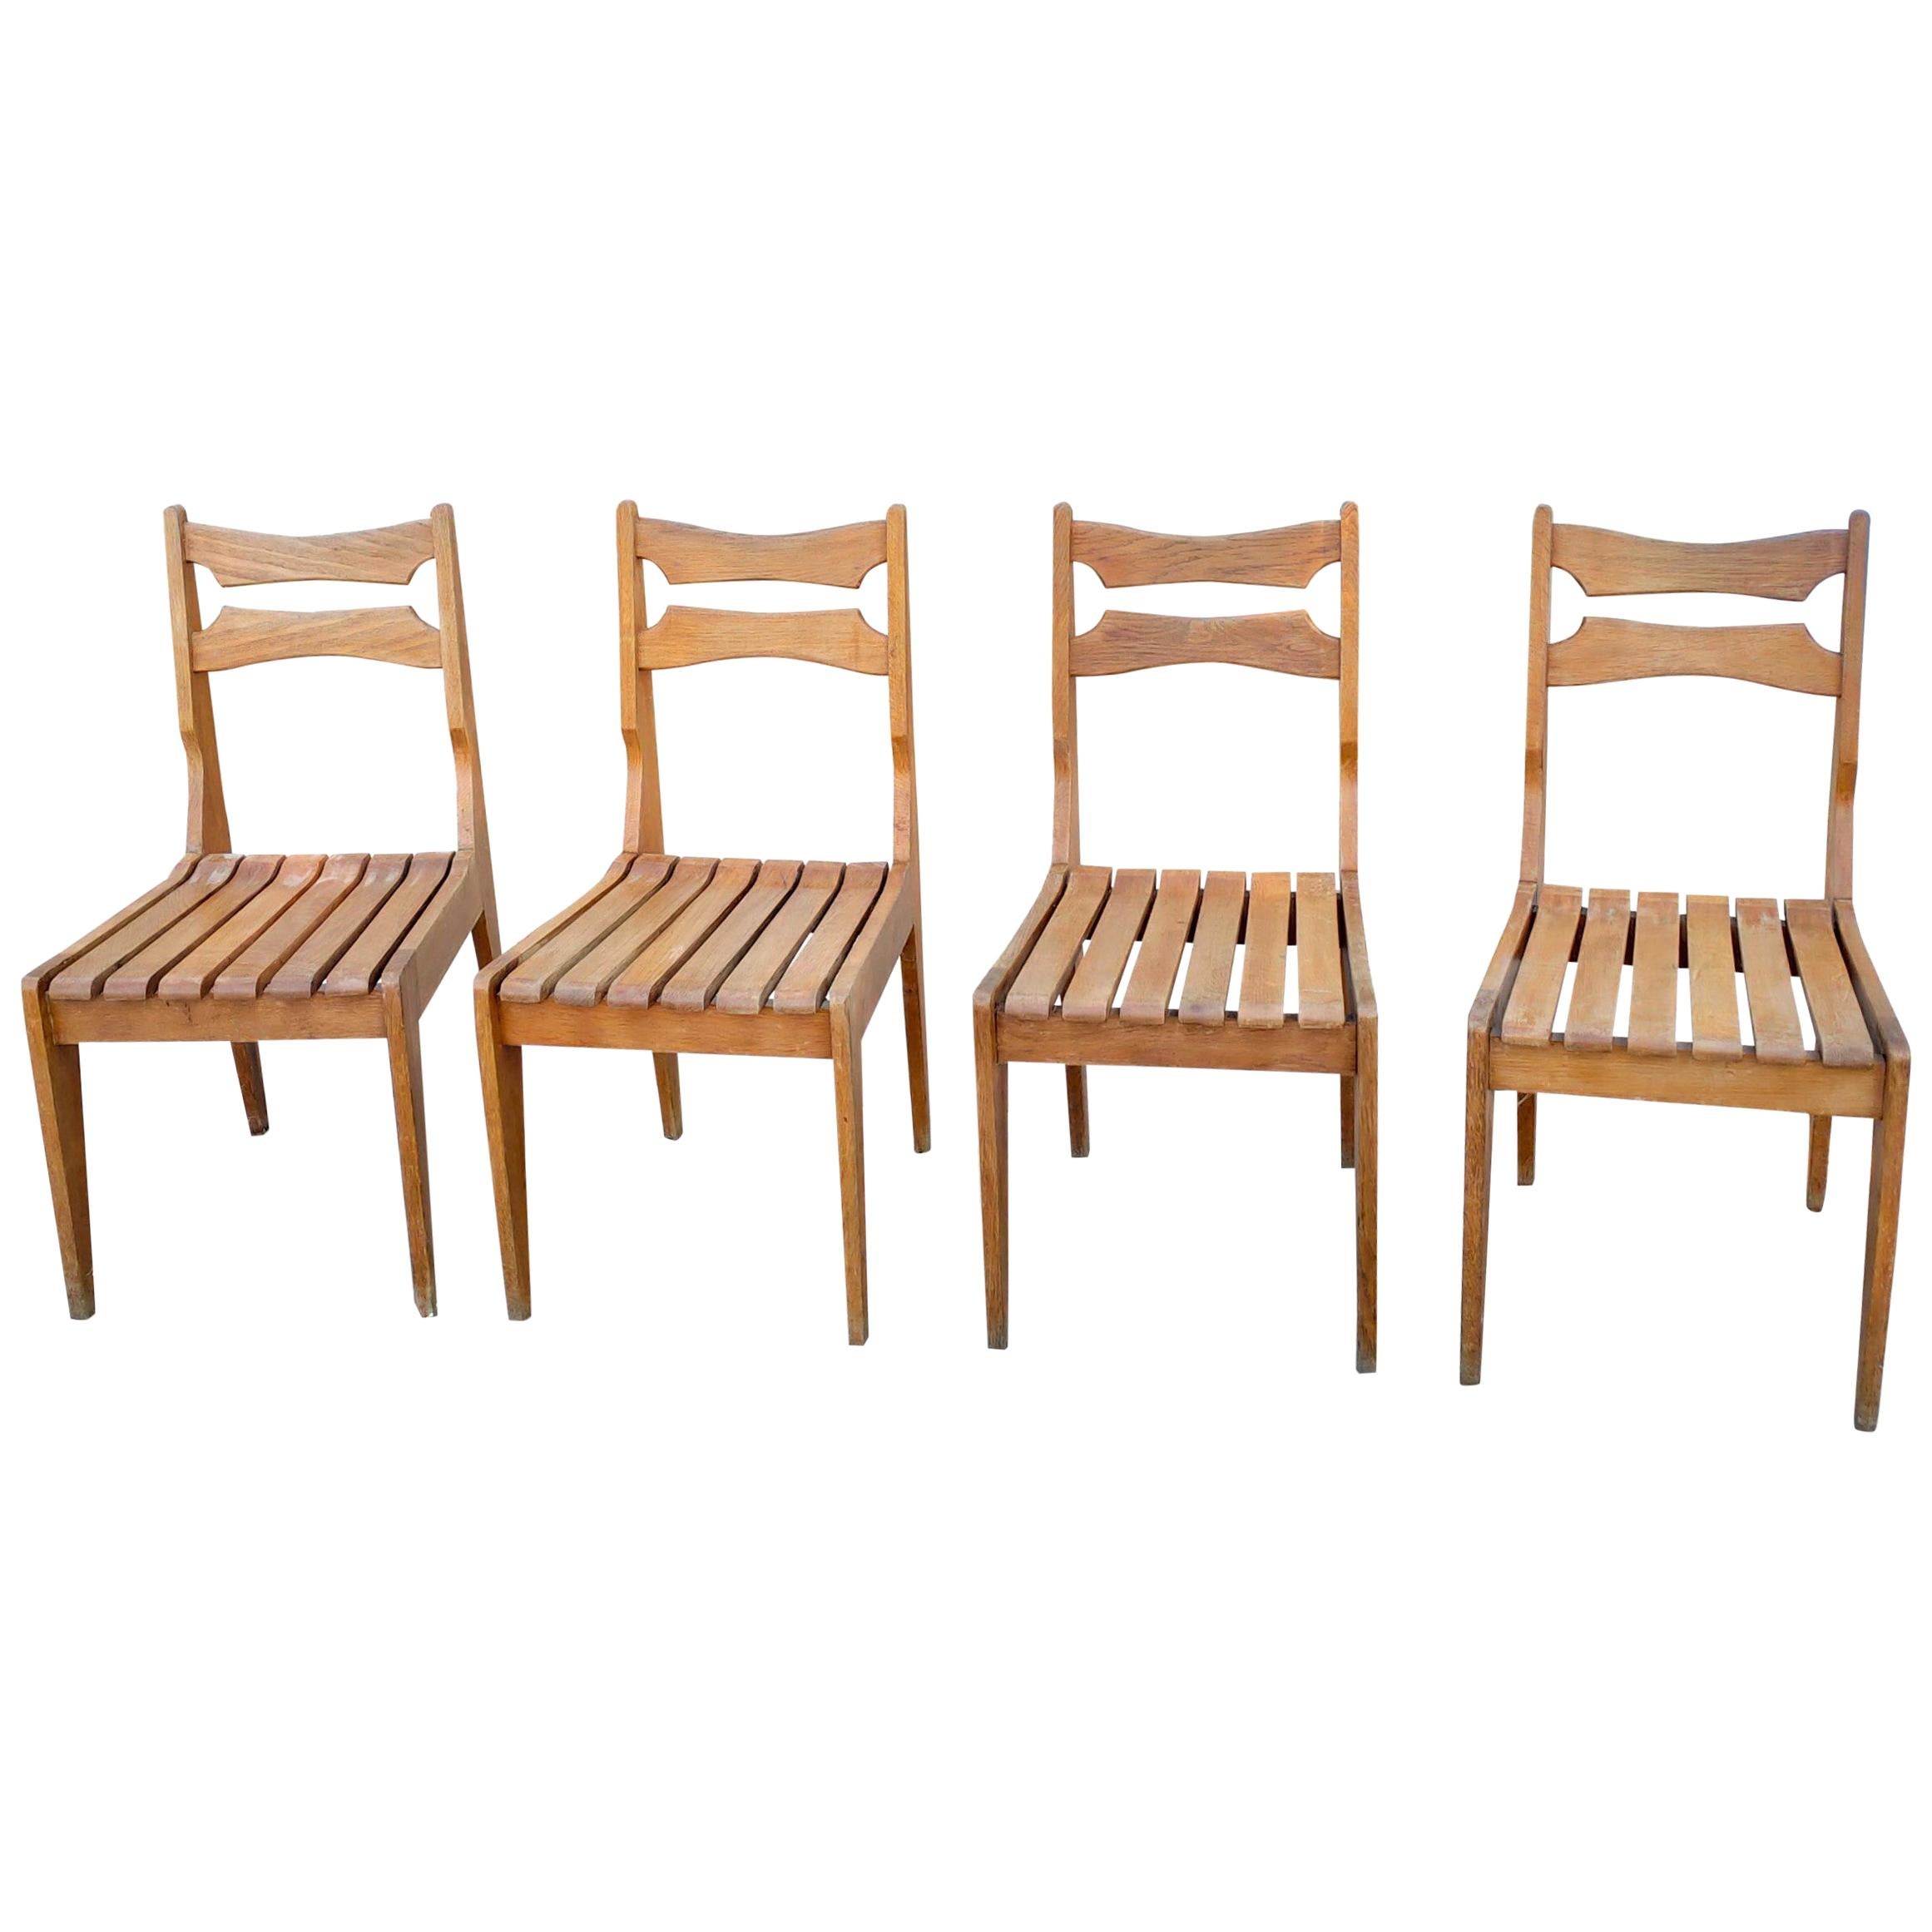 Set of 4 Solid Oak Slats Chairs by Guillerme & Chambron, France, 1960s